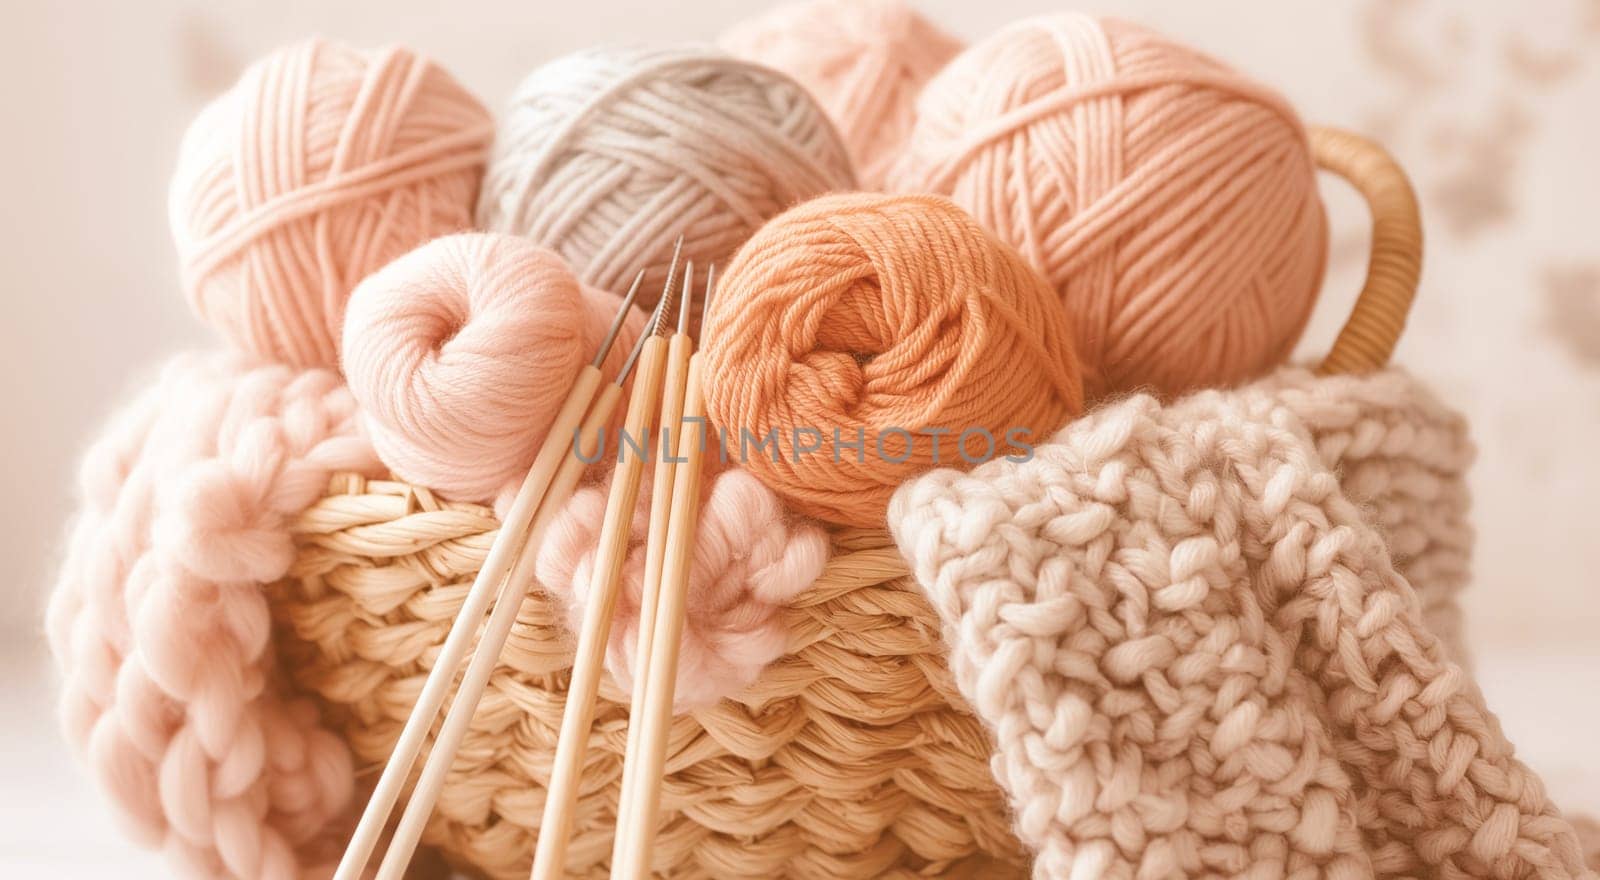 Colorful yarn balls and knitting needles in a basket, indicating a cozy crafting theme. by kizuneko